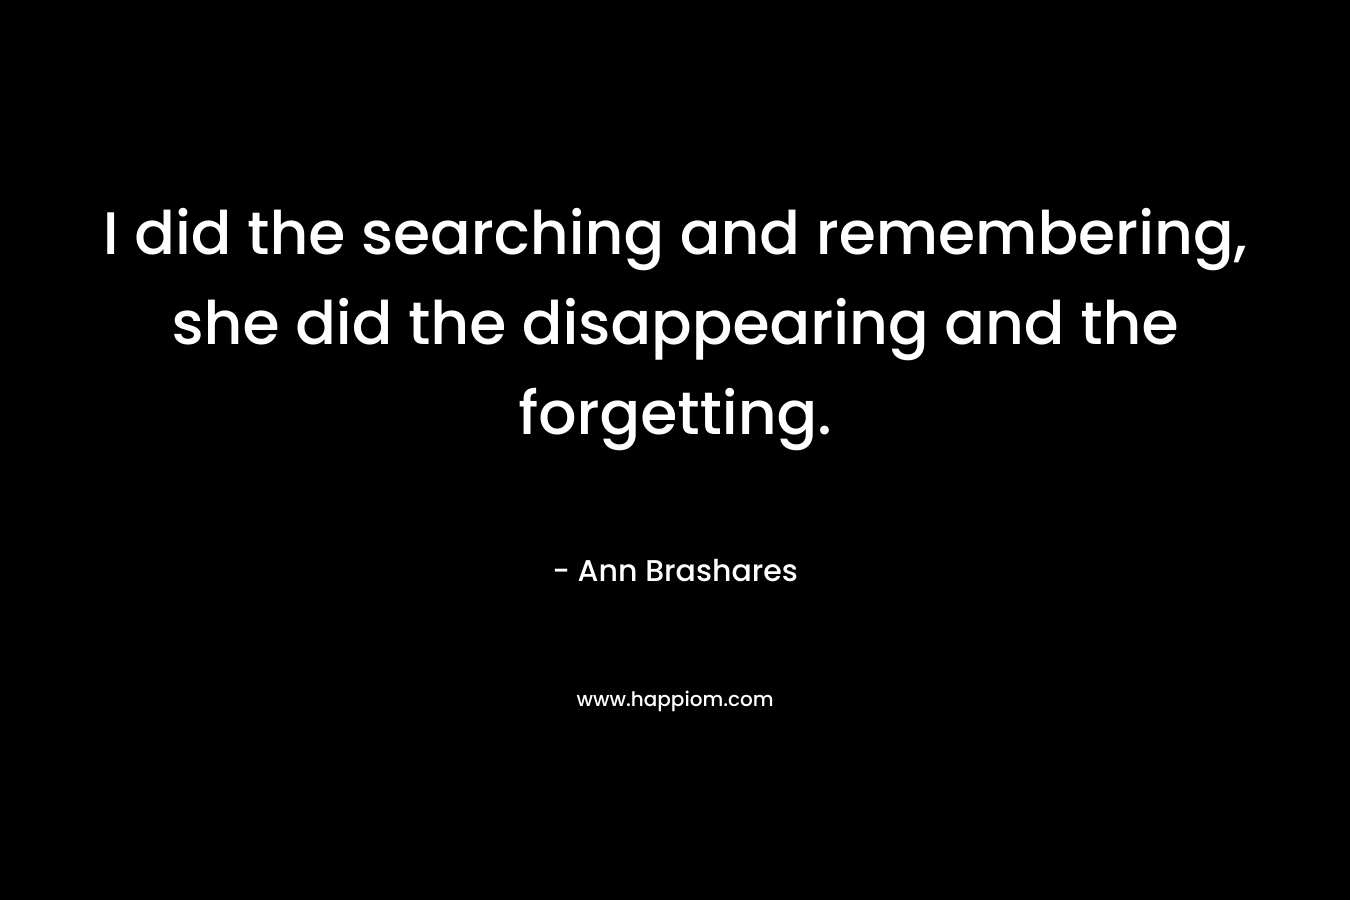 I did the searching and remembering, she did the disappearing and the forgetting. – Ann Brashares